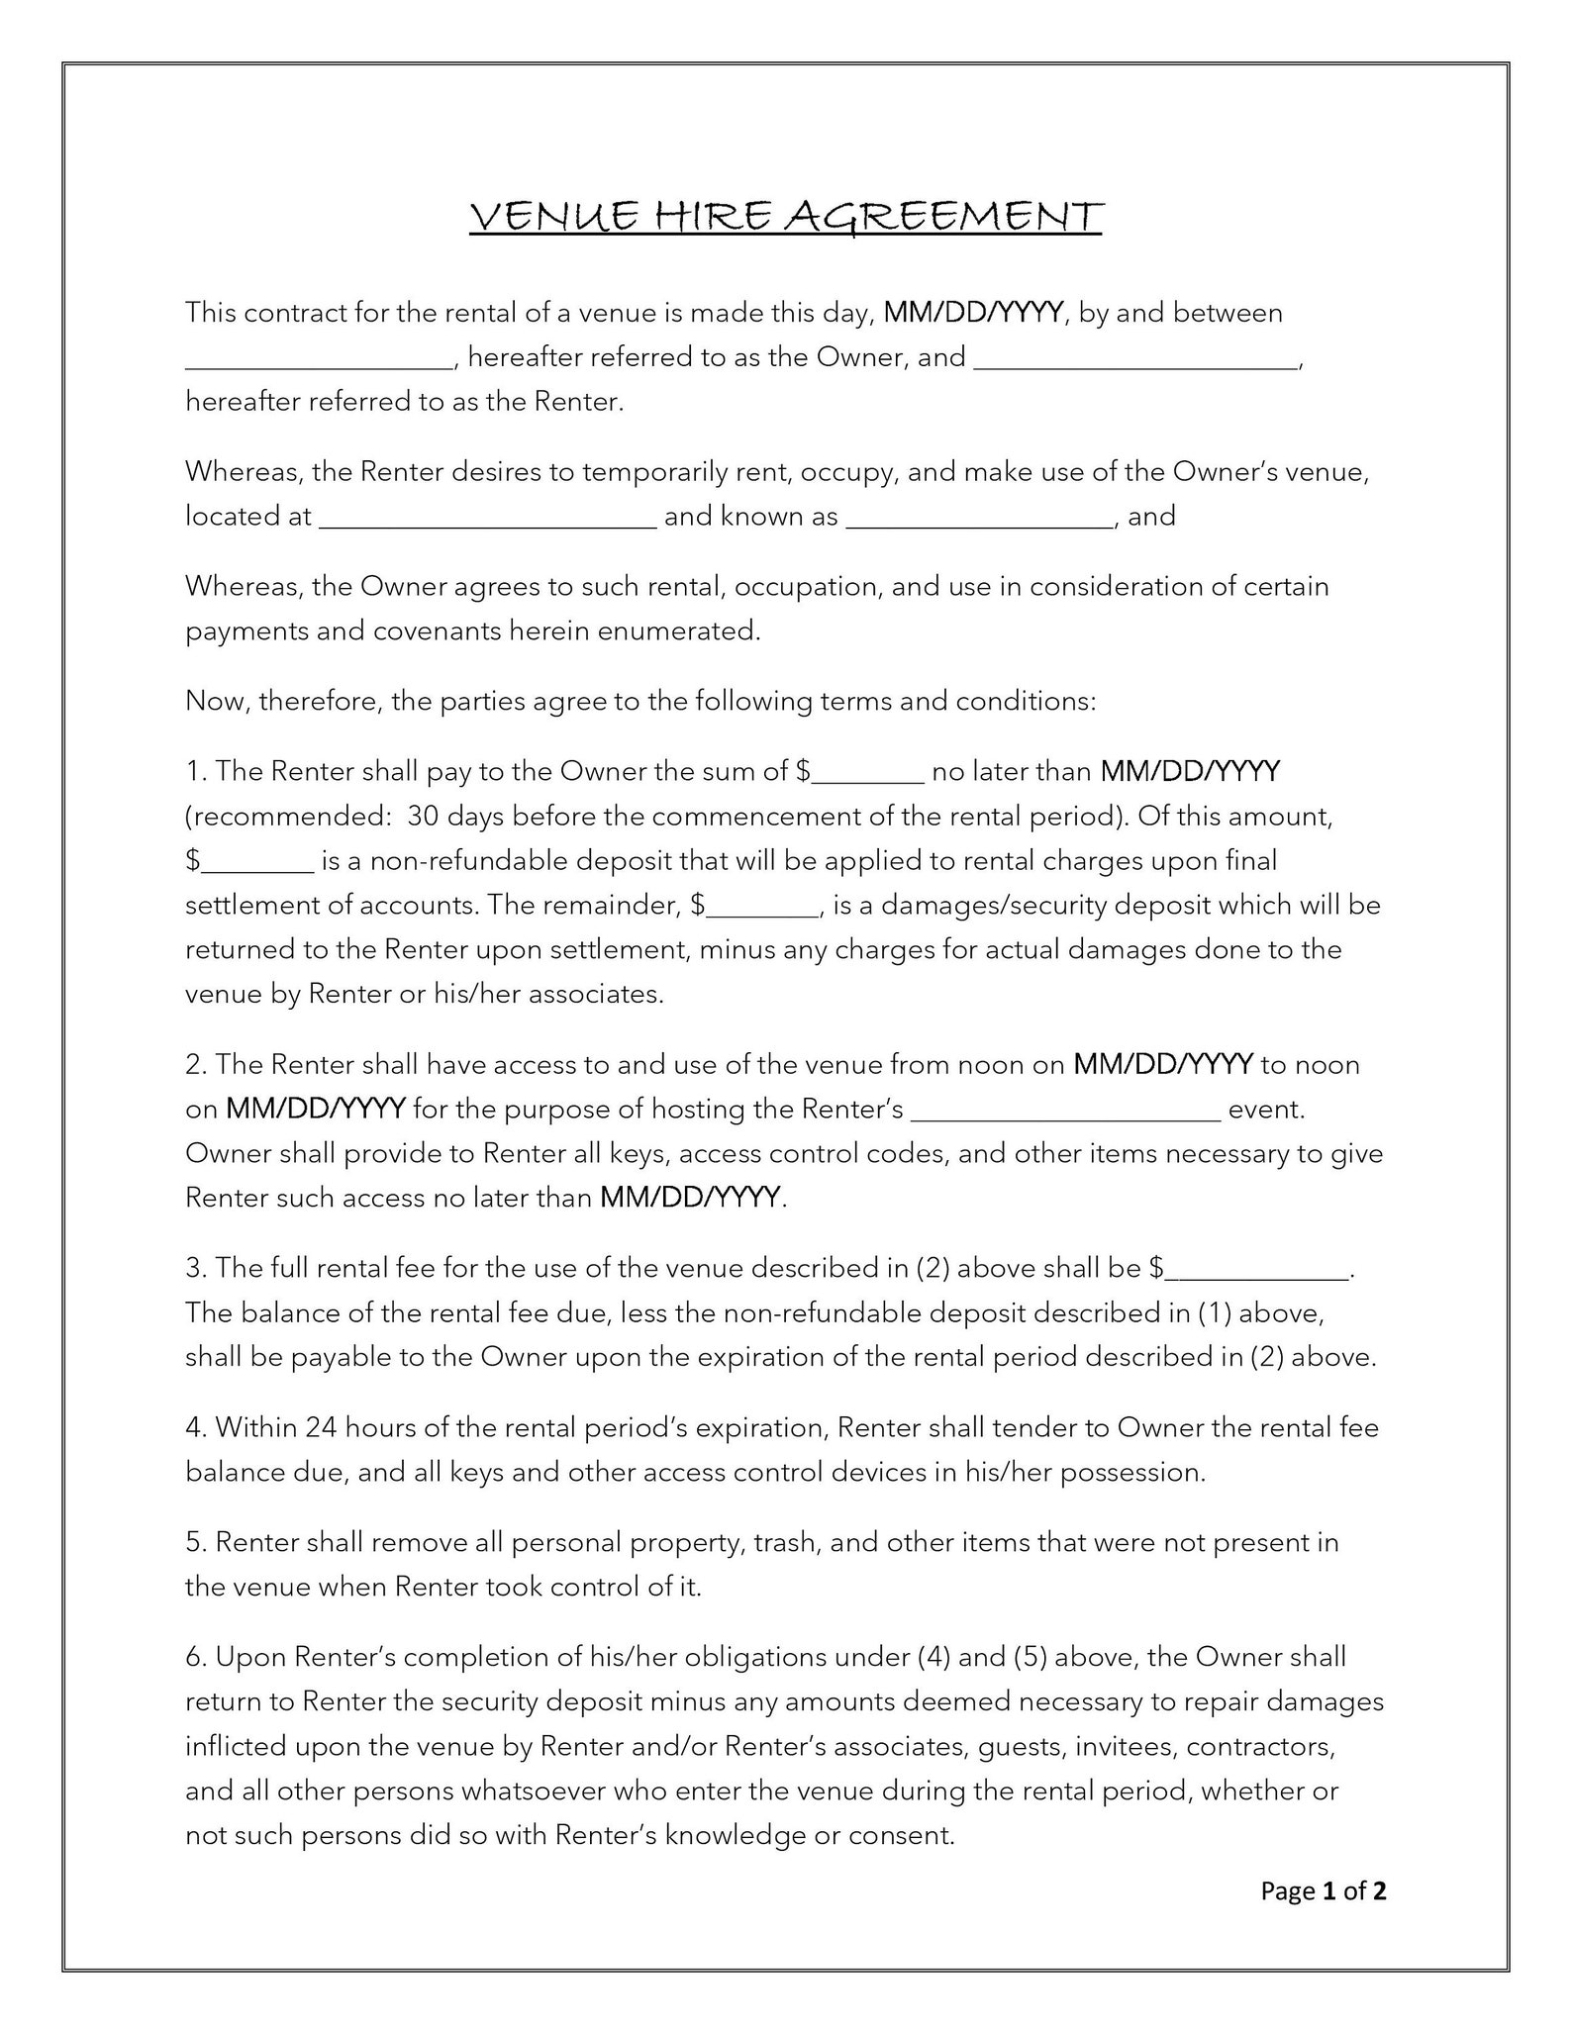 Easy To Edit Venue Hire Agreement / Microsoft Word / Hire | Etsy for venue hire agreement template